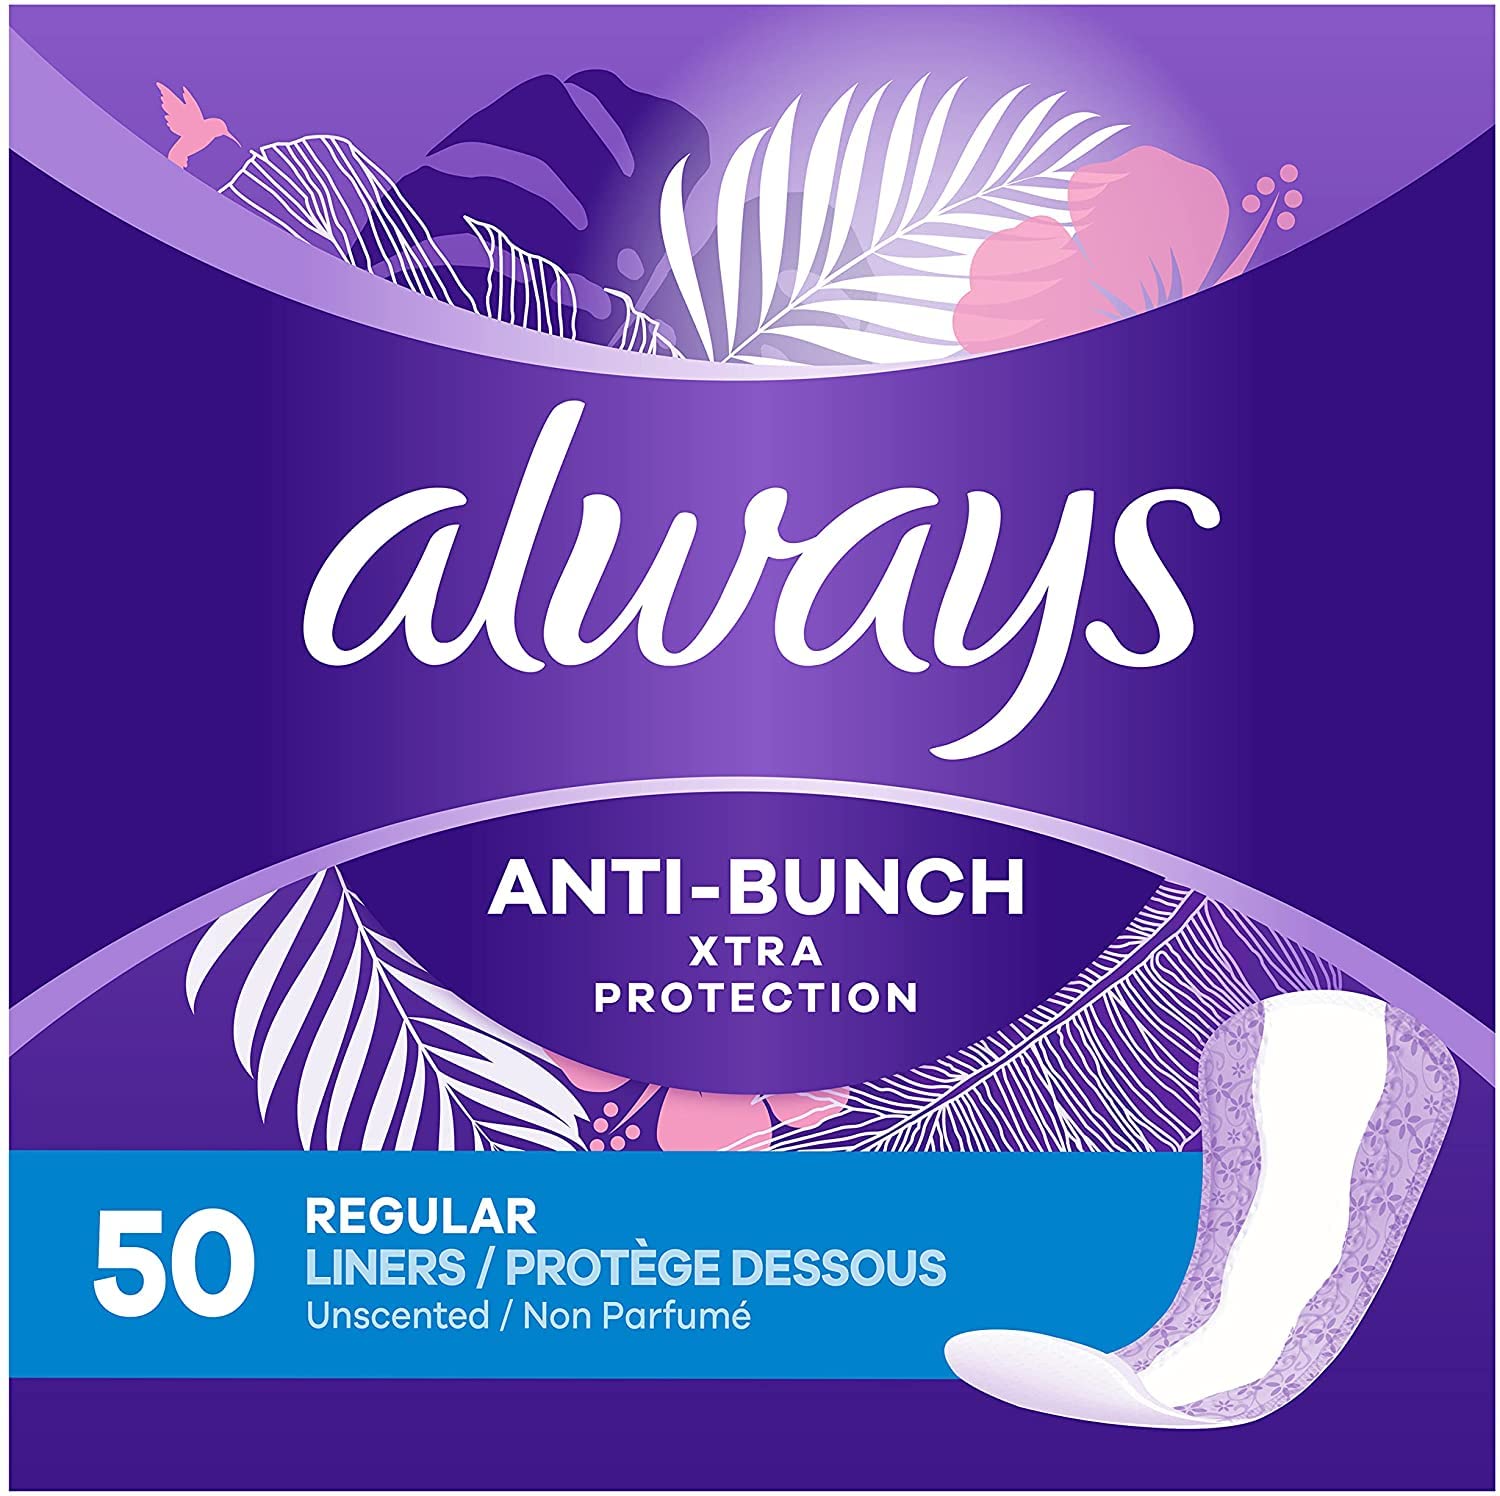 Beyond Protection: Discovering The Suprising uses of Panty liners, benefits of panty liners, panty liners, uses of panty liners and more